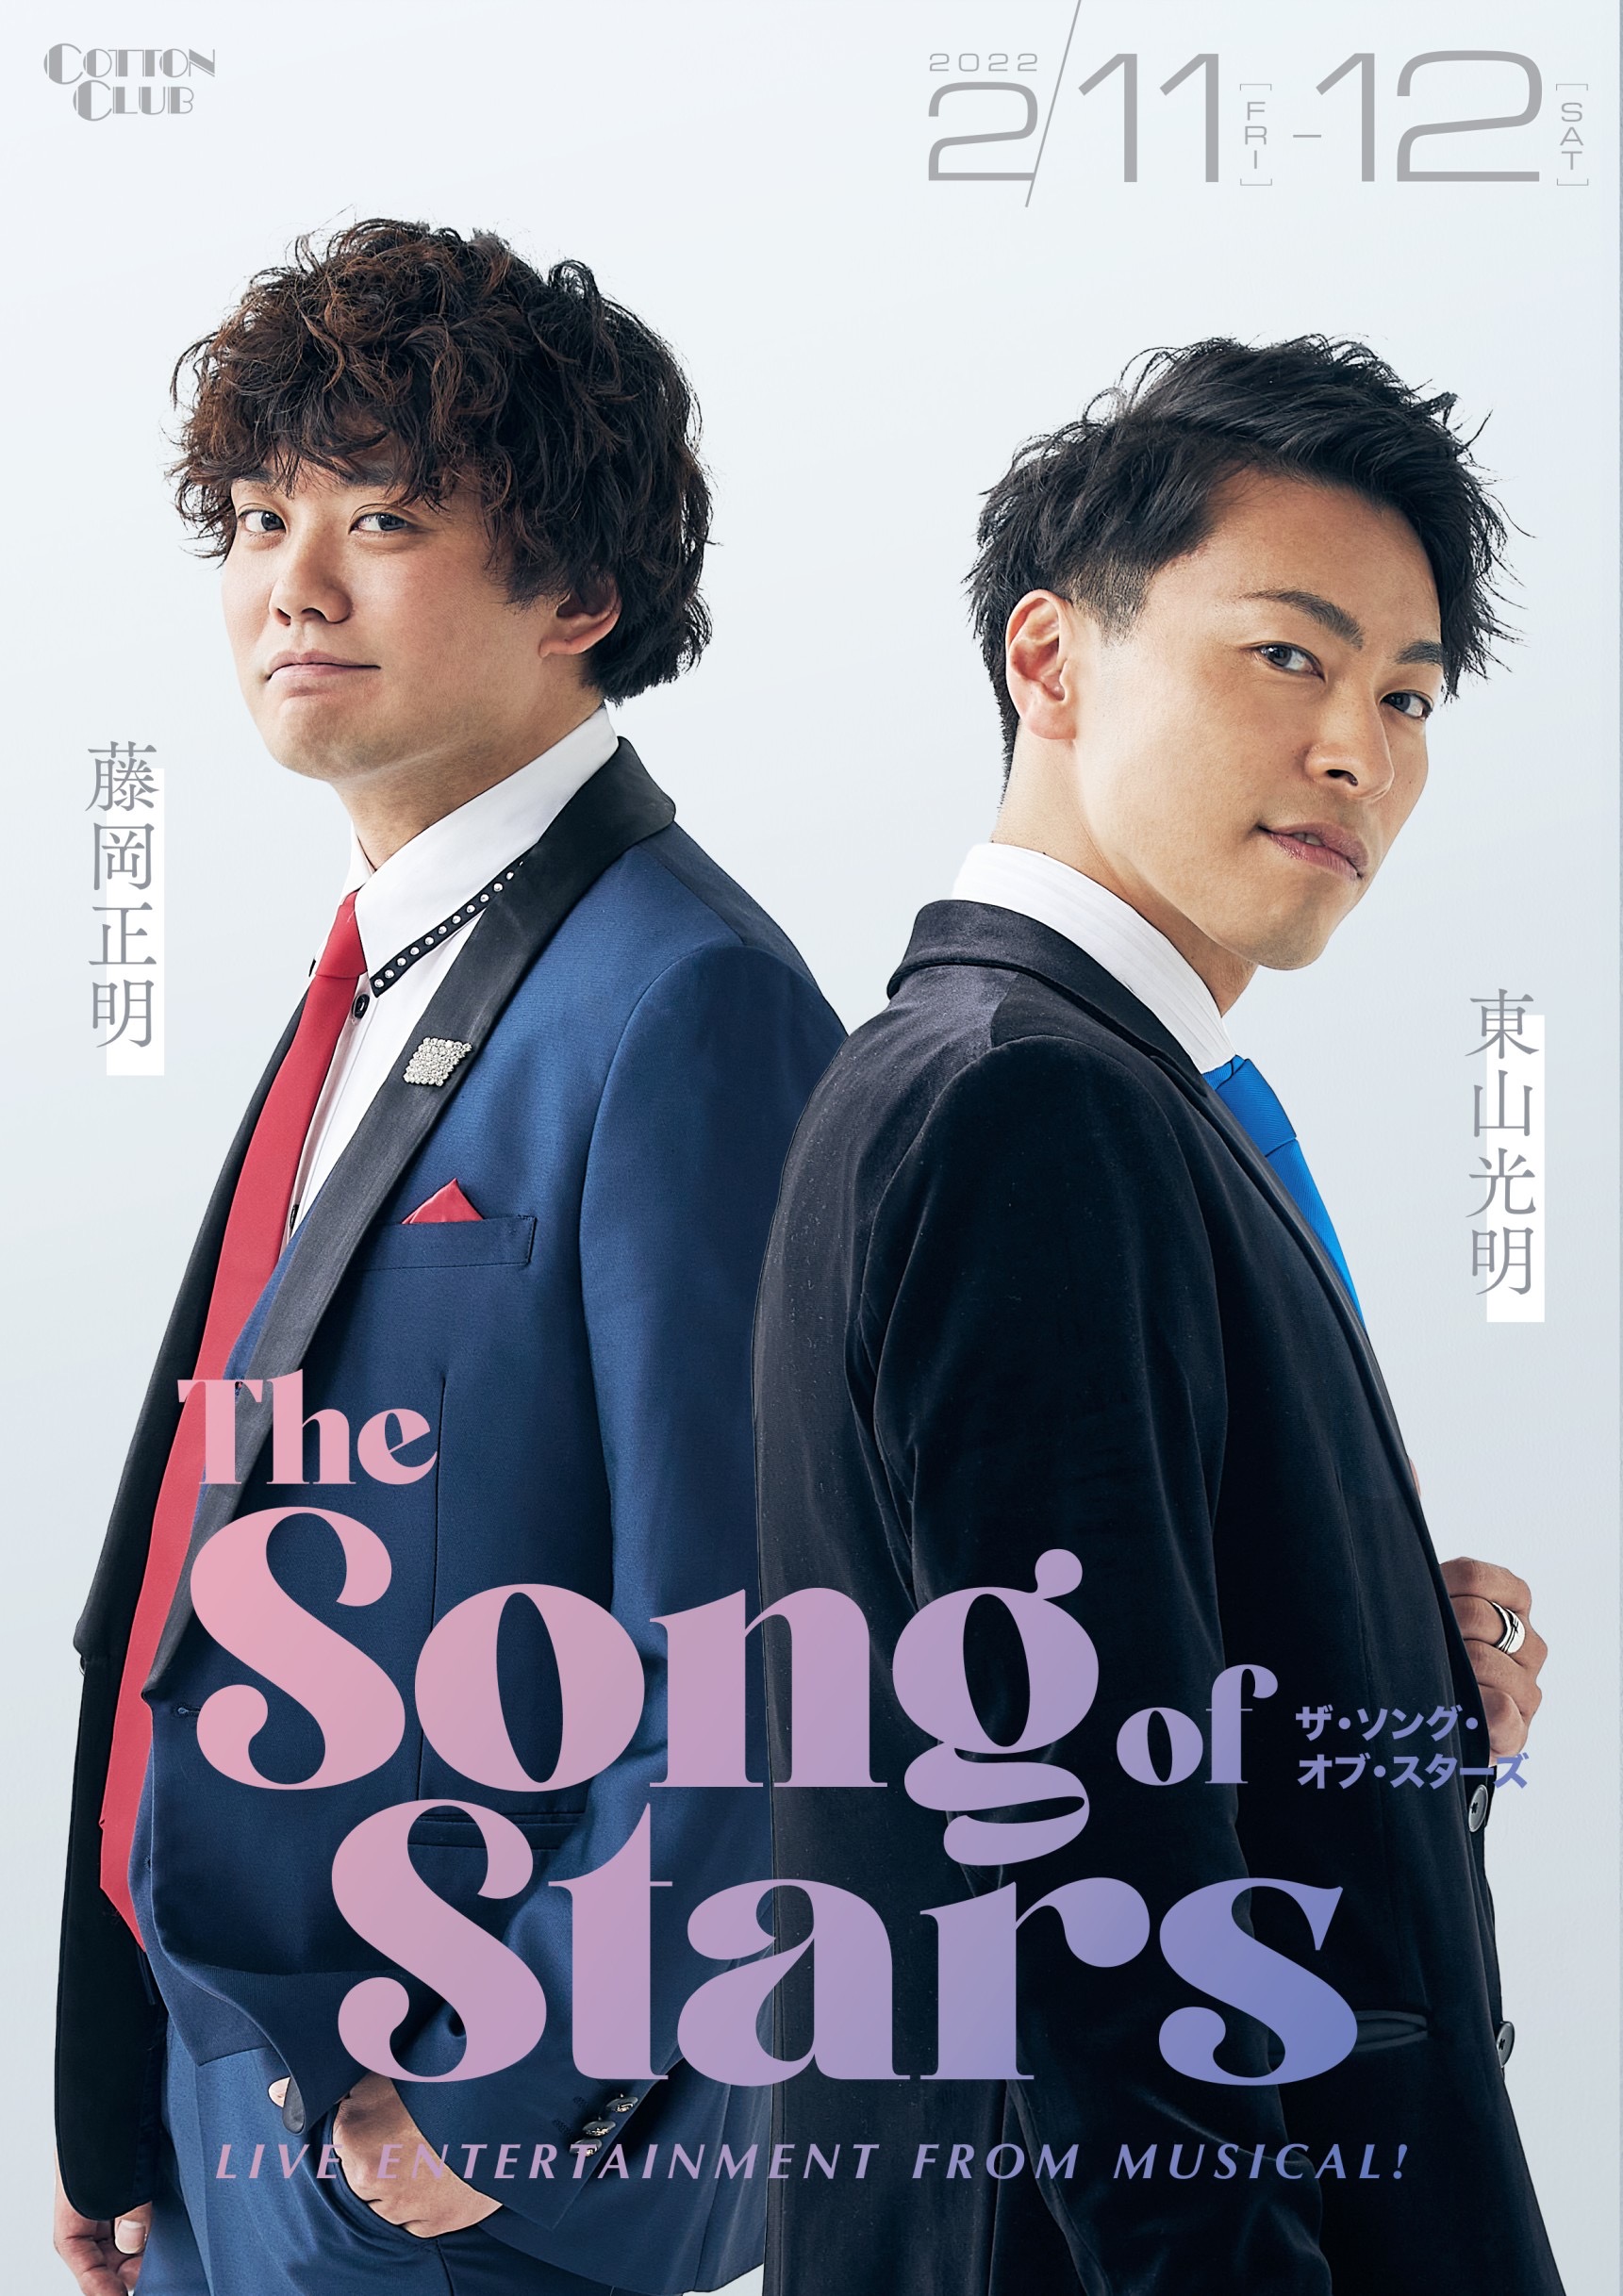 【2/11 2nd.show】東山光明×藤岡正明『The Song of Stars』 ～Live Entertainment from Musical～